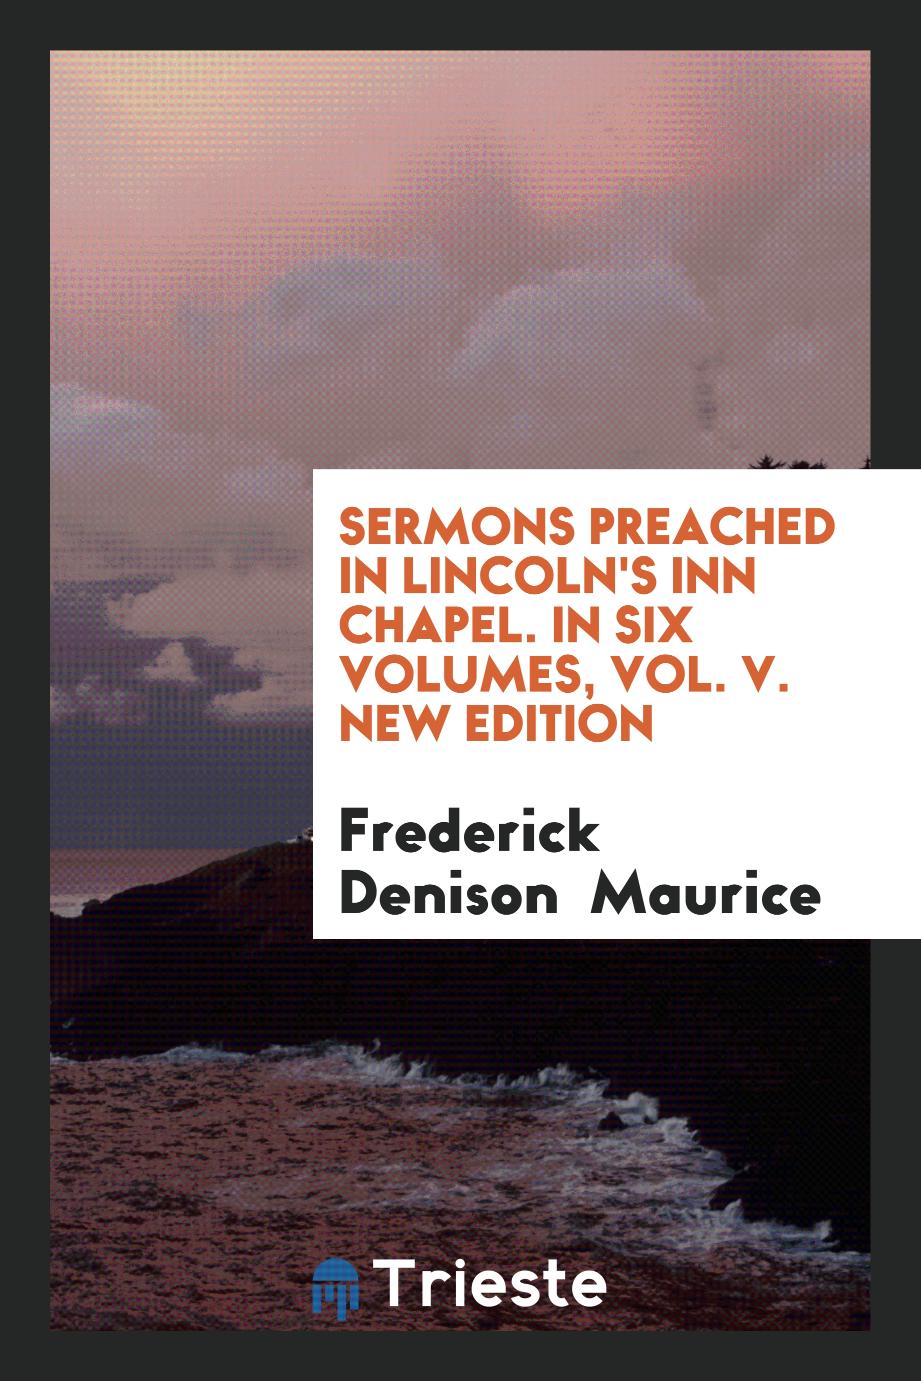 Frederick Denison Maurice - Sermons Preached in Lincoln's Inn Chapel. In Six Volumes, Vol. V. New Edition